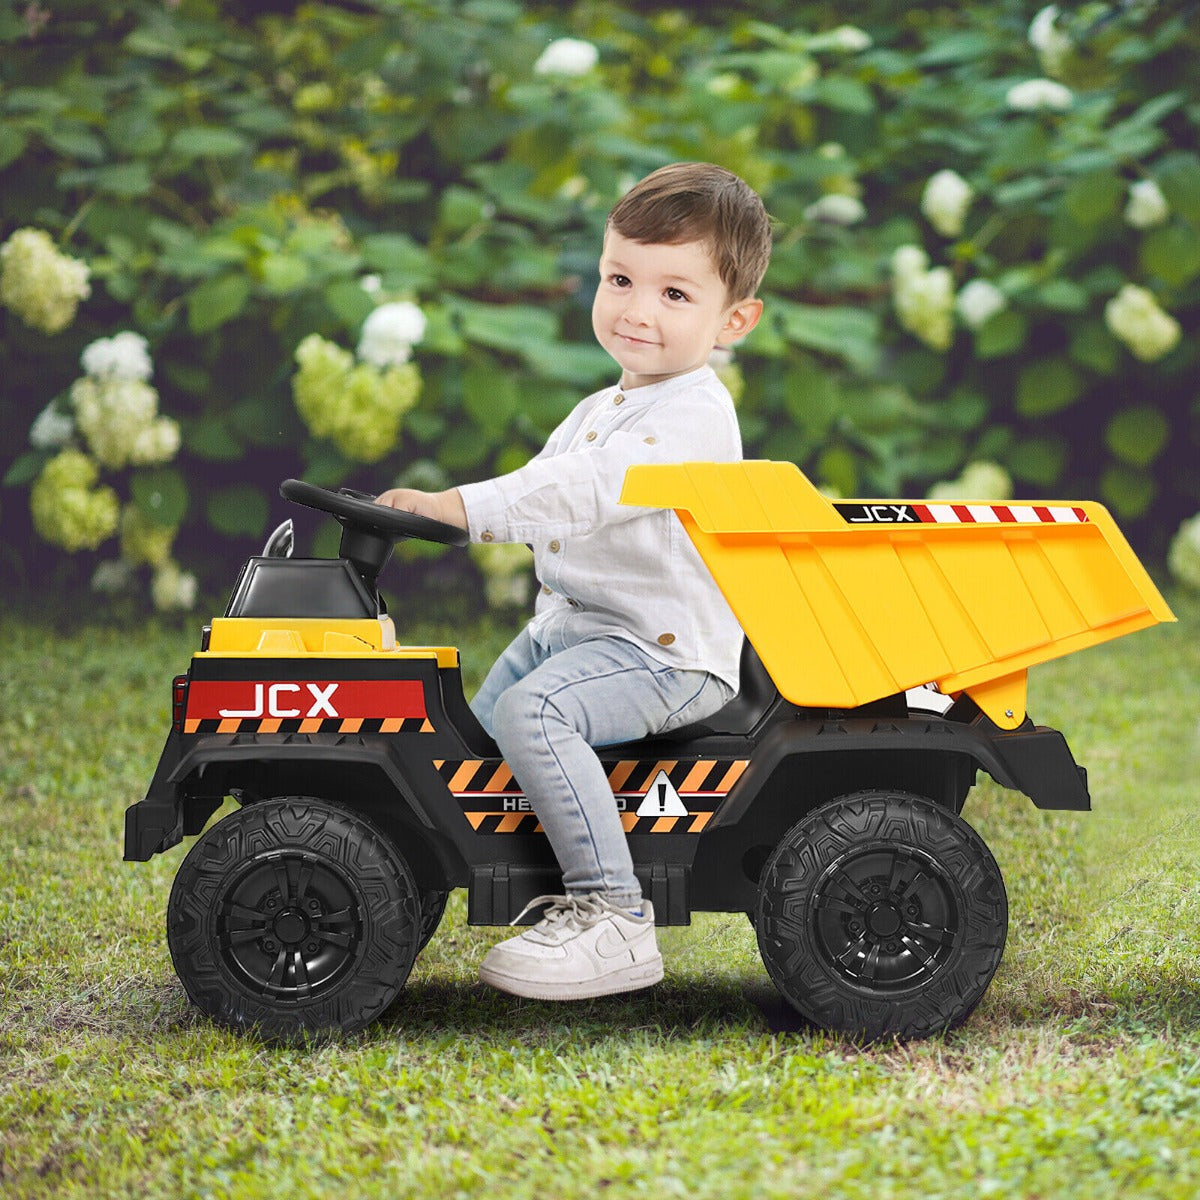 3 Speeds Electric Ride On Dump Truck with Remote Control and Music for Kids-Yellow